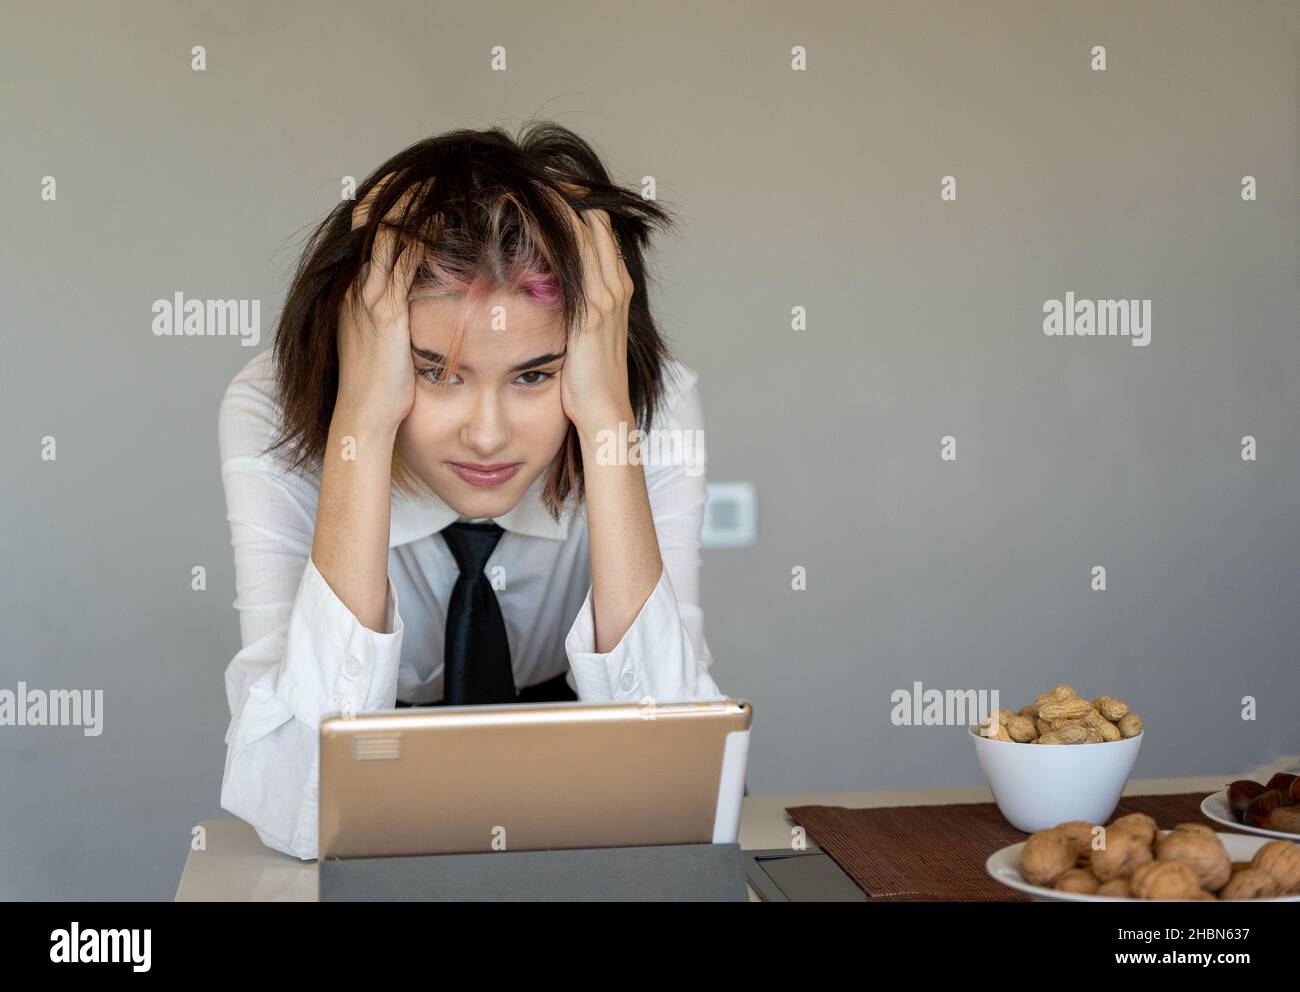 woman with her hands on her head frustrated in front of her tablet, staring at the camera Stock Photo